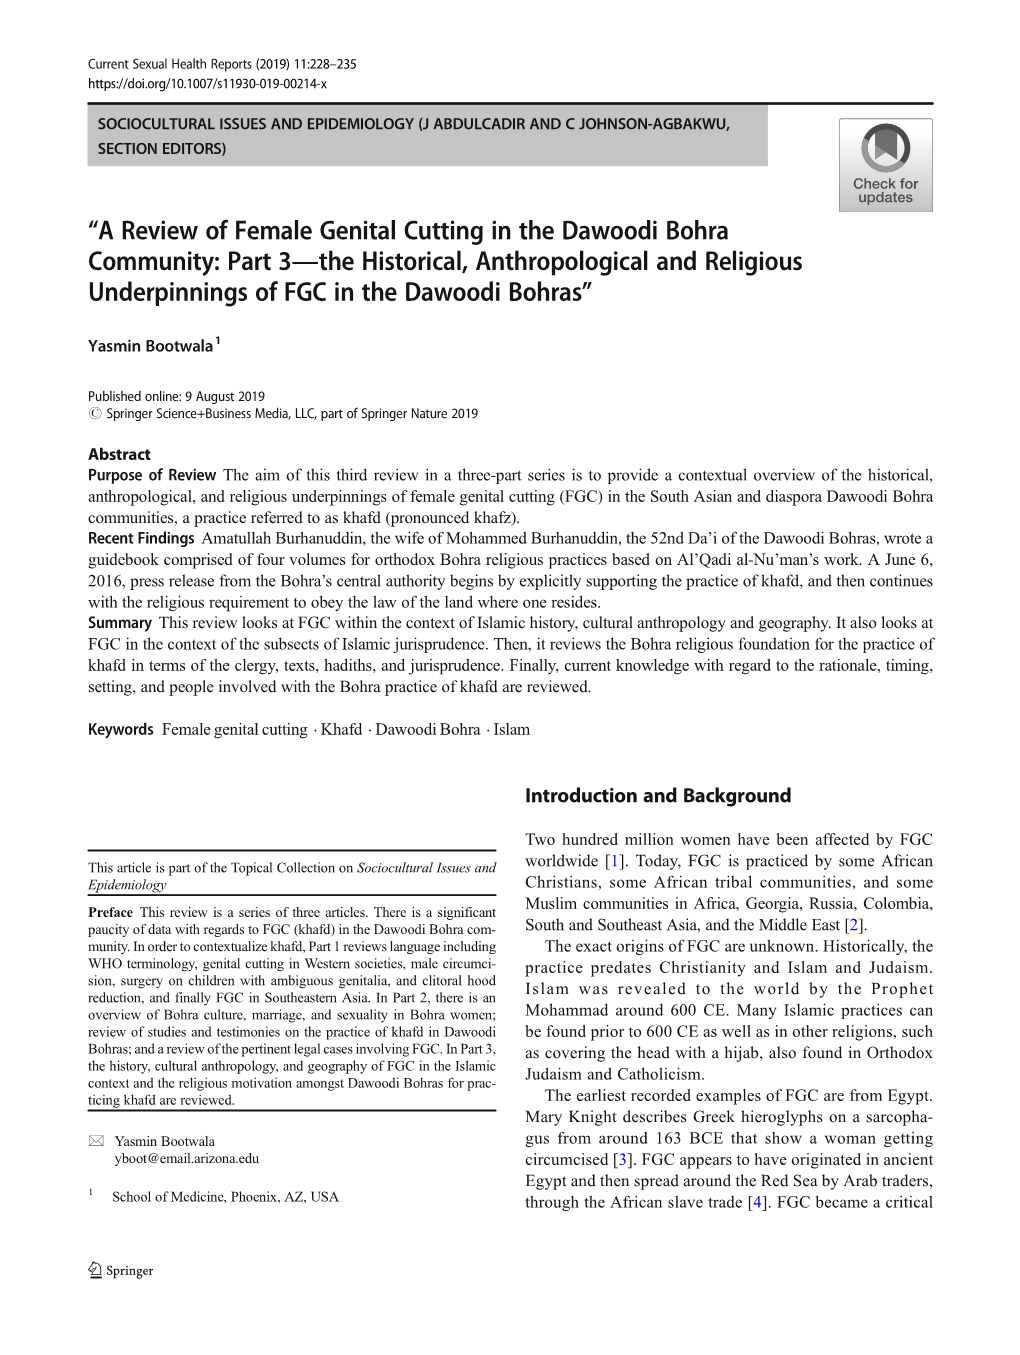 “A Review of Female Genital Cutting in the Dawoodi Bohra Community: Part 3—The Historical, Anthropological and Religious Underpinnings of FGC in the Dawoodi Bohras”